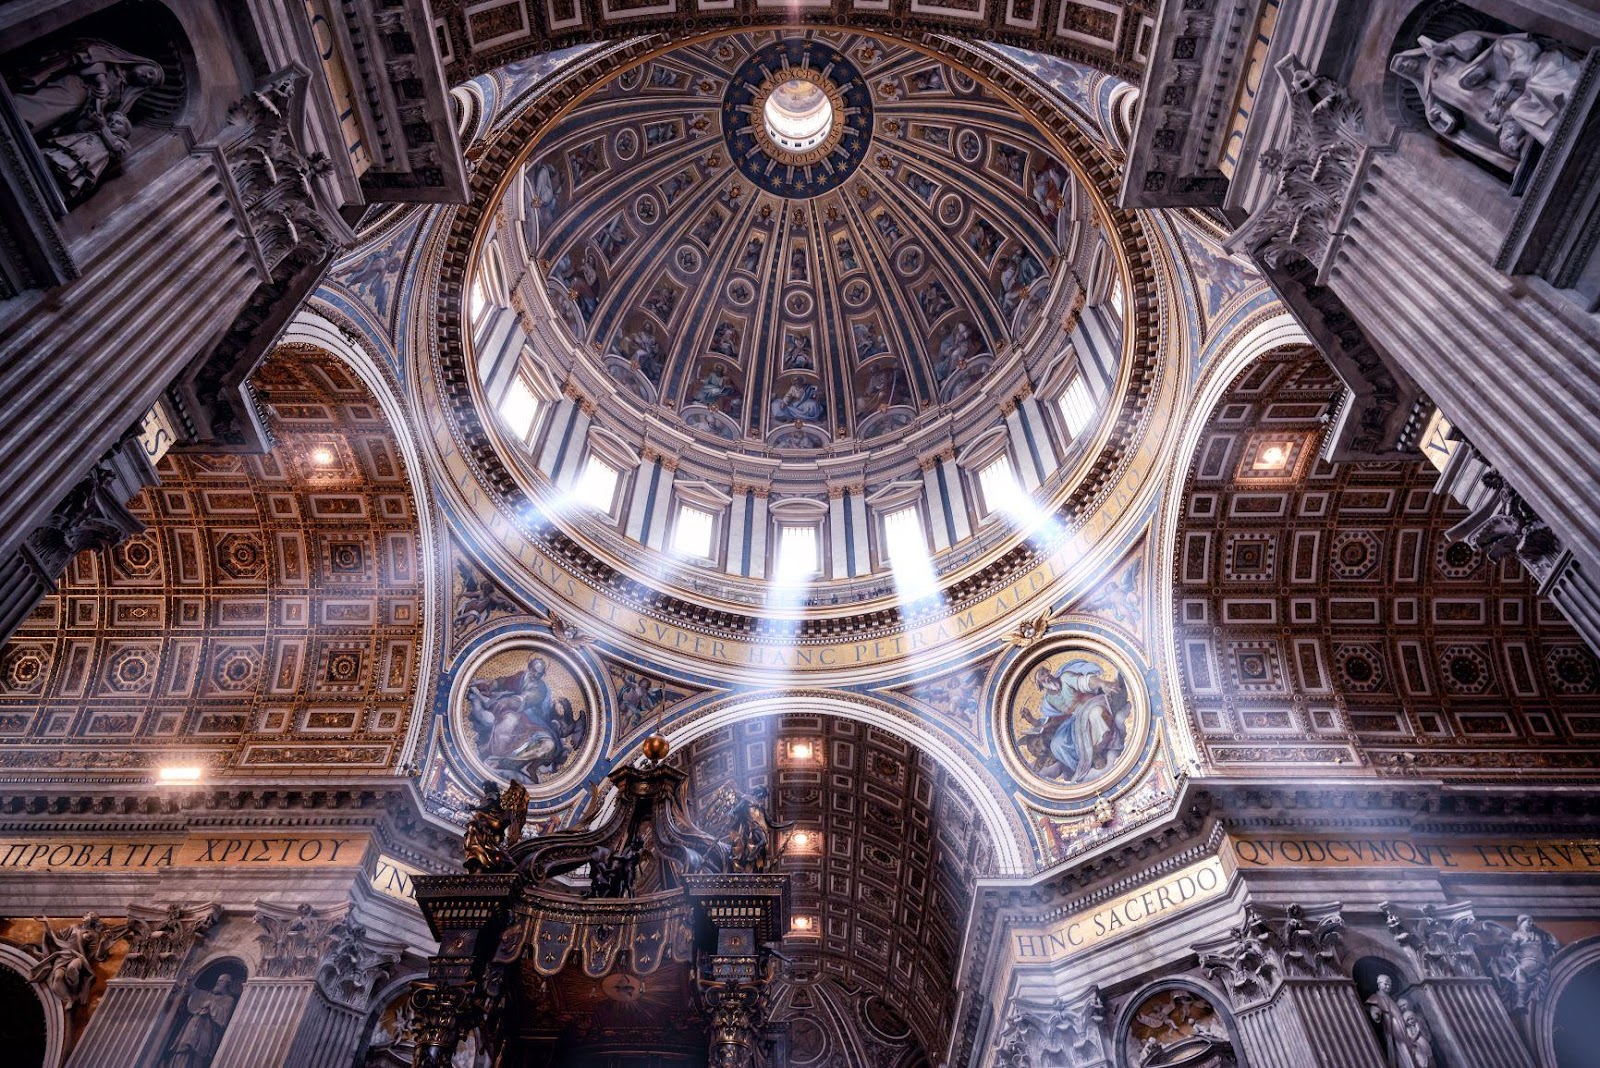 A ceiling with light shining through the ceiling with St. Peter's Basilica in the background

Description automatically generated with medium confidence